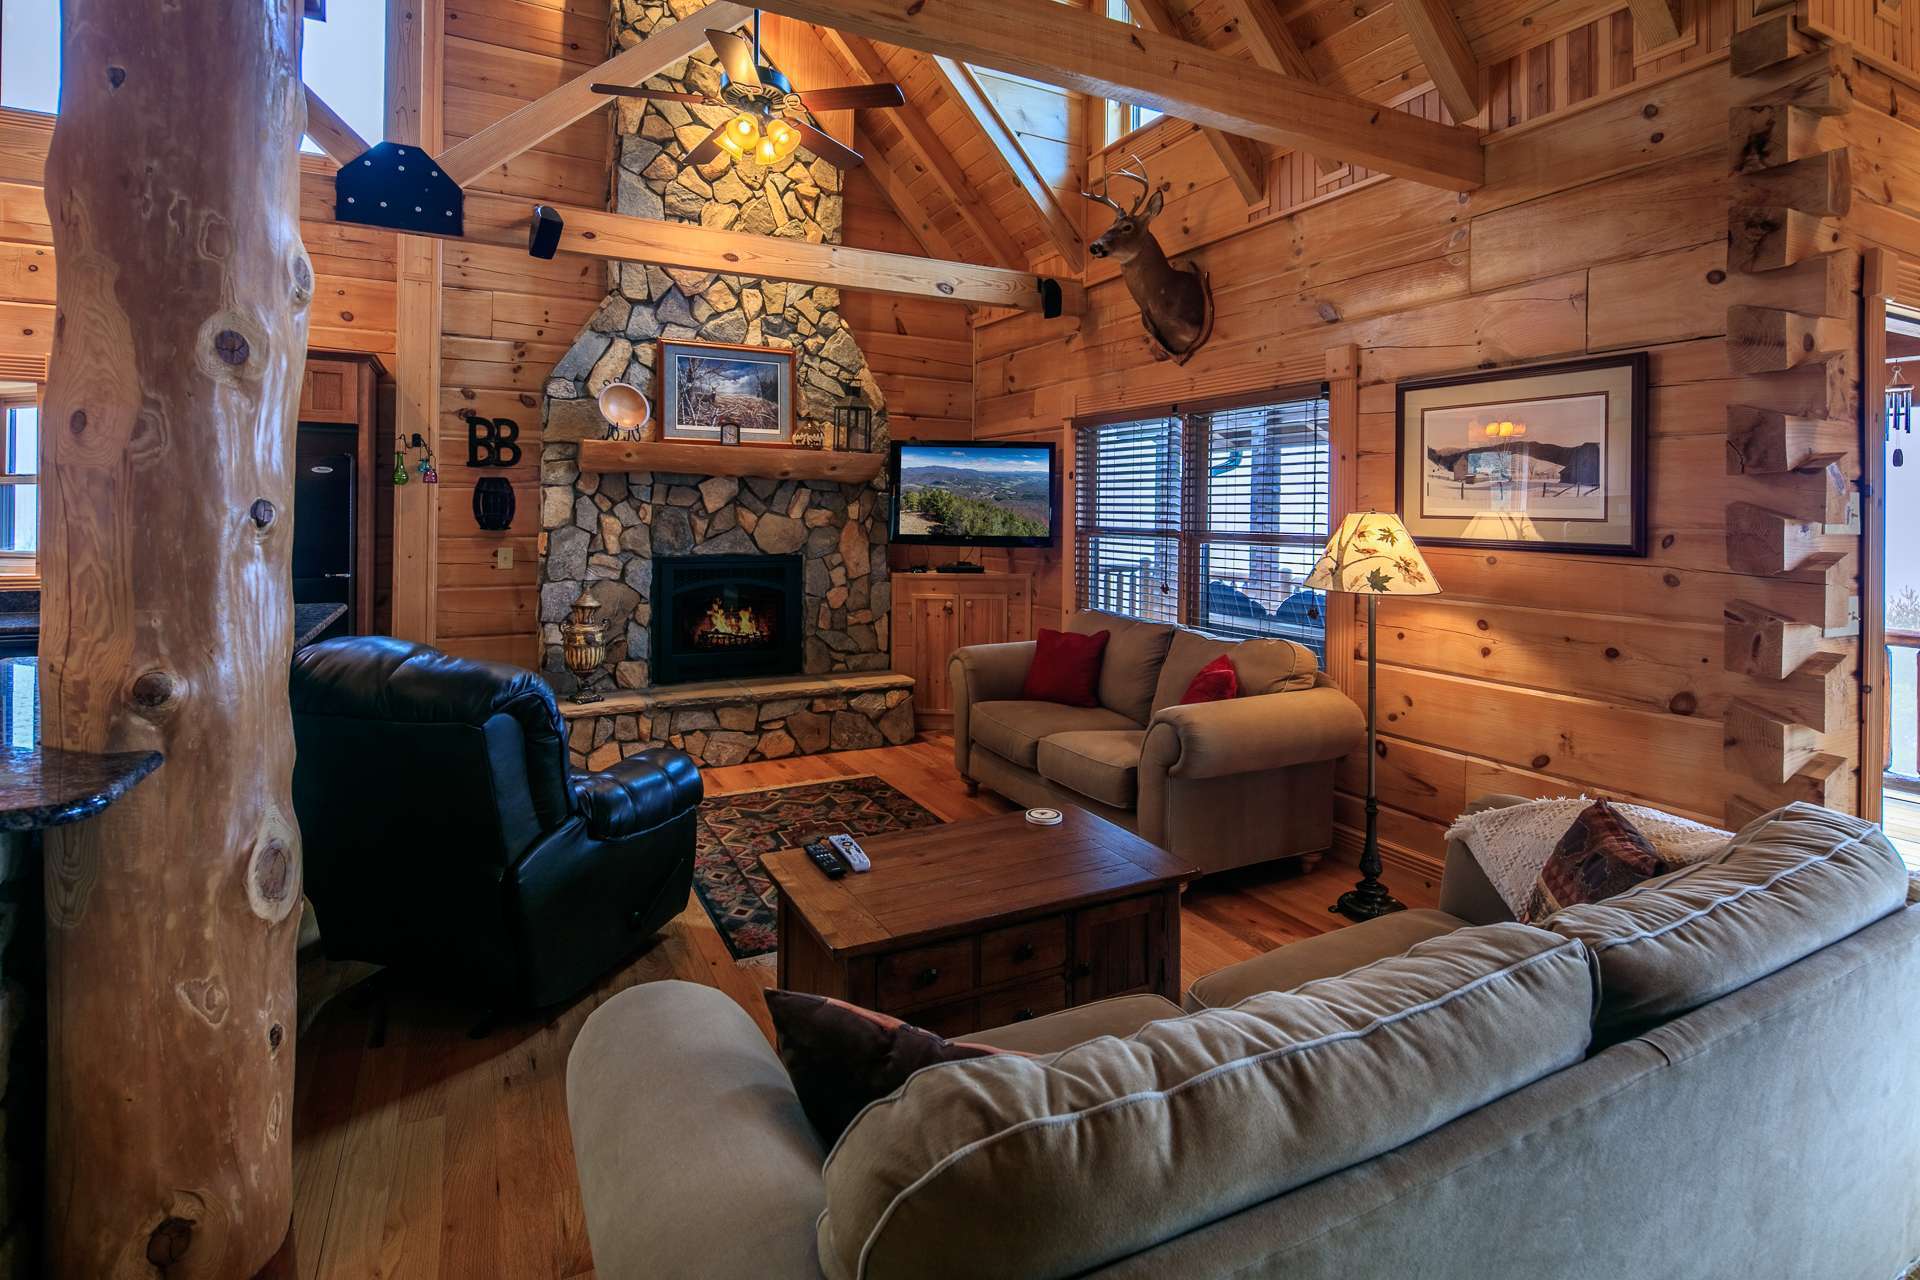 The living area focuses on savoring true mountain living with modern conveniences. You will enjoy the added warmth and ambiance of the two-story stone fireplace.